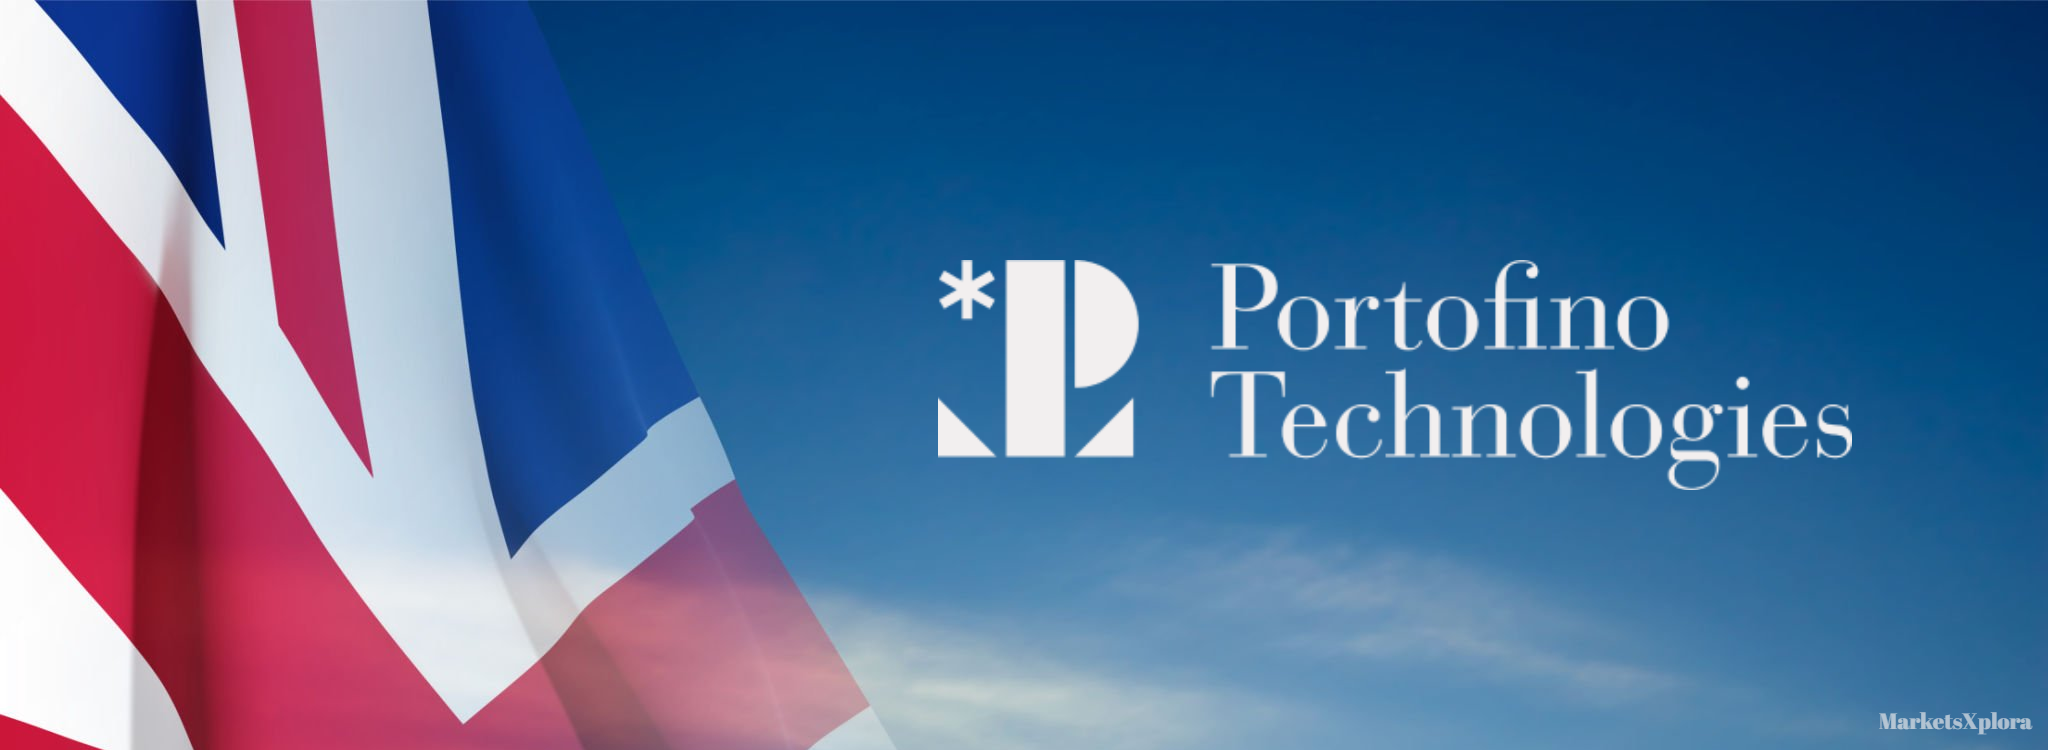 Portofino Technologies achieved registration from Britain's Financial Conduct Authority for institutional crypto services, cementing its status as a regulated global digital asset trading provider.